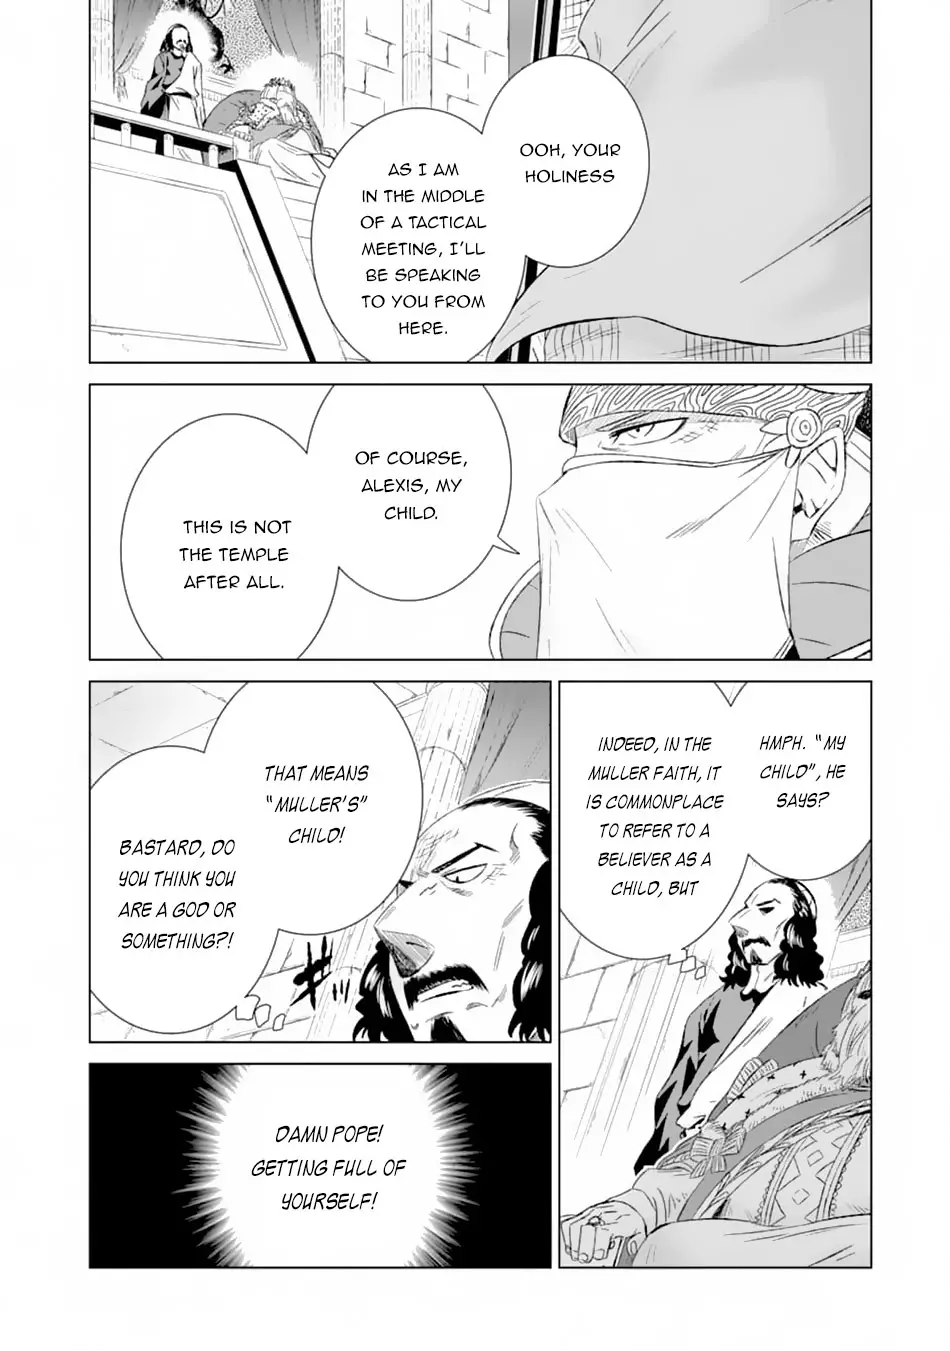 The Only Monster Tamer In The World: I Was Mistaken For The Demon King When I Changed My Job - 20 page 14-f0114e79